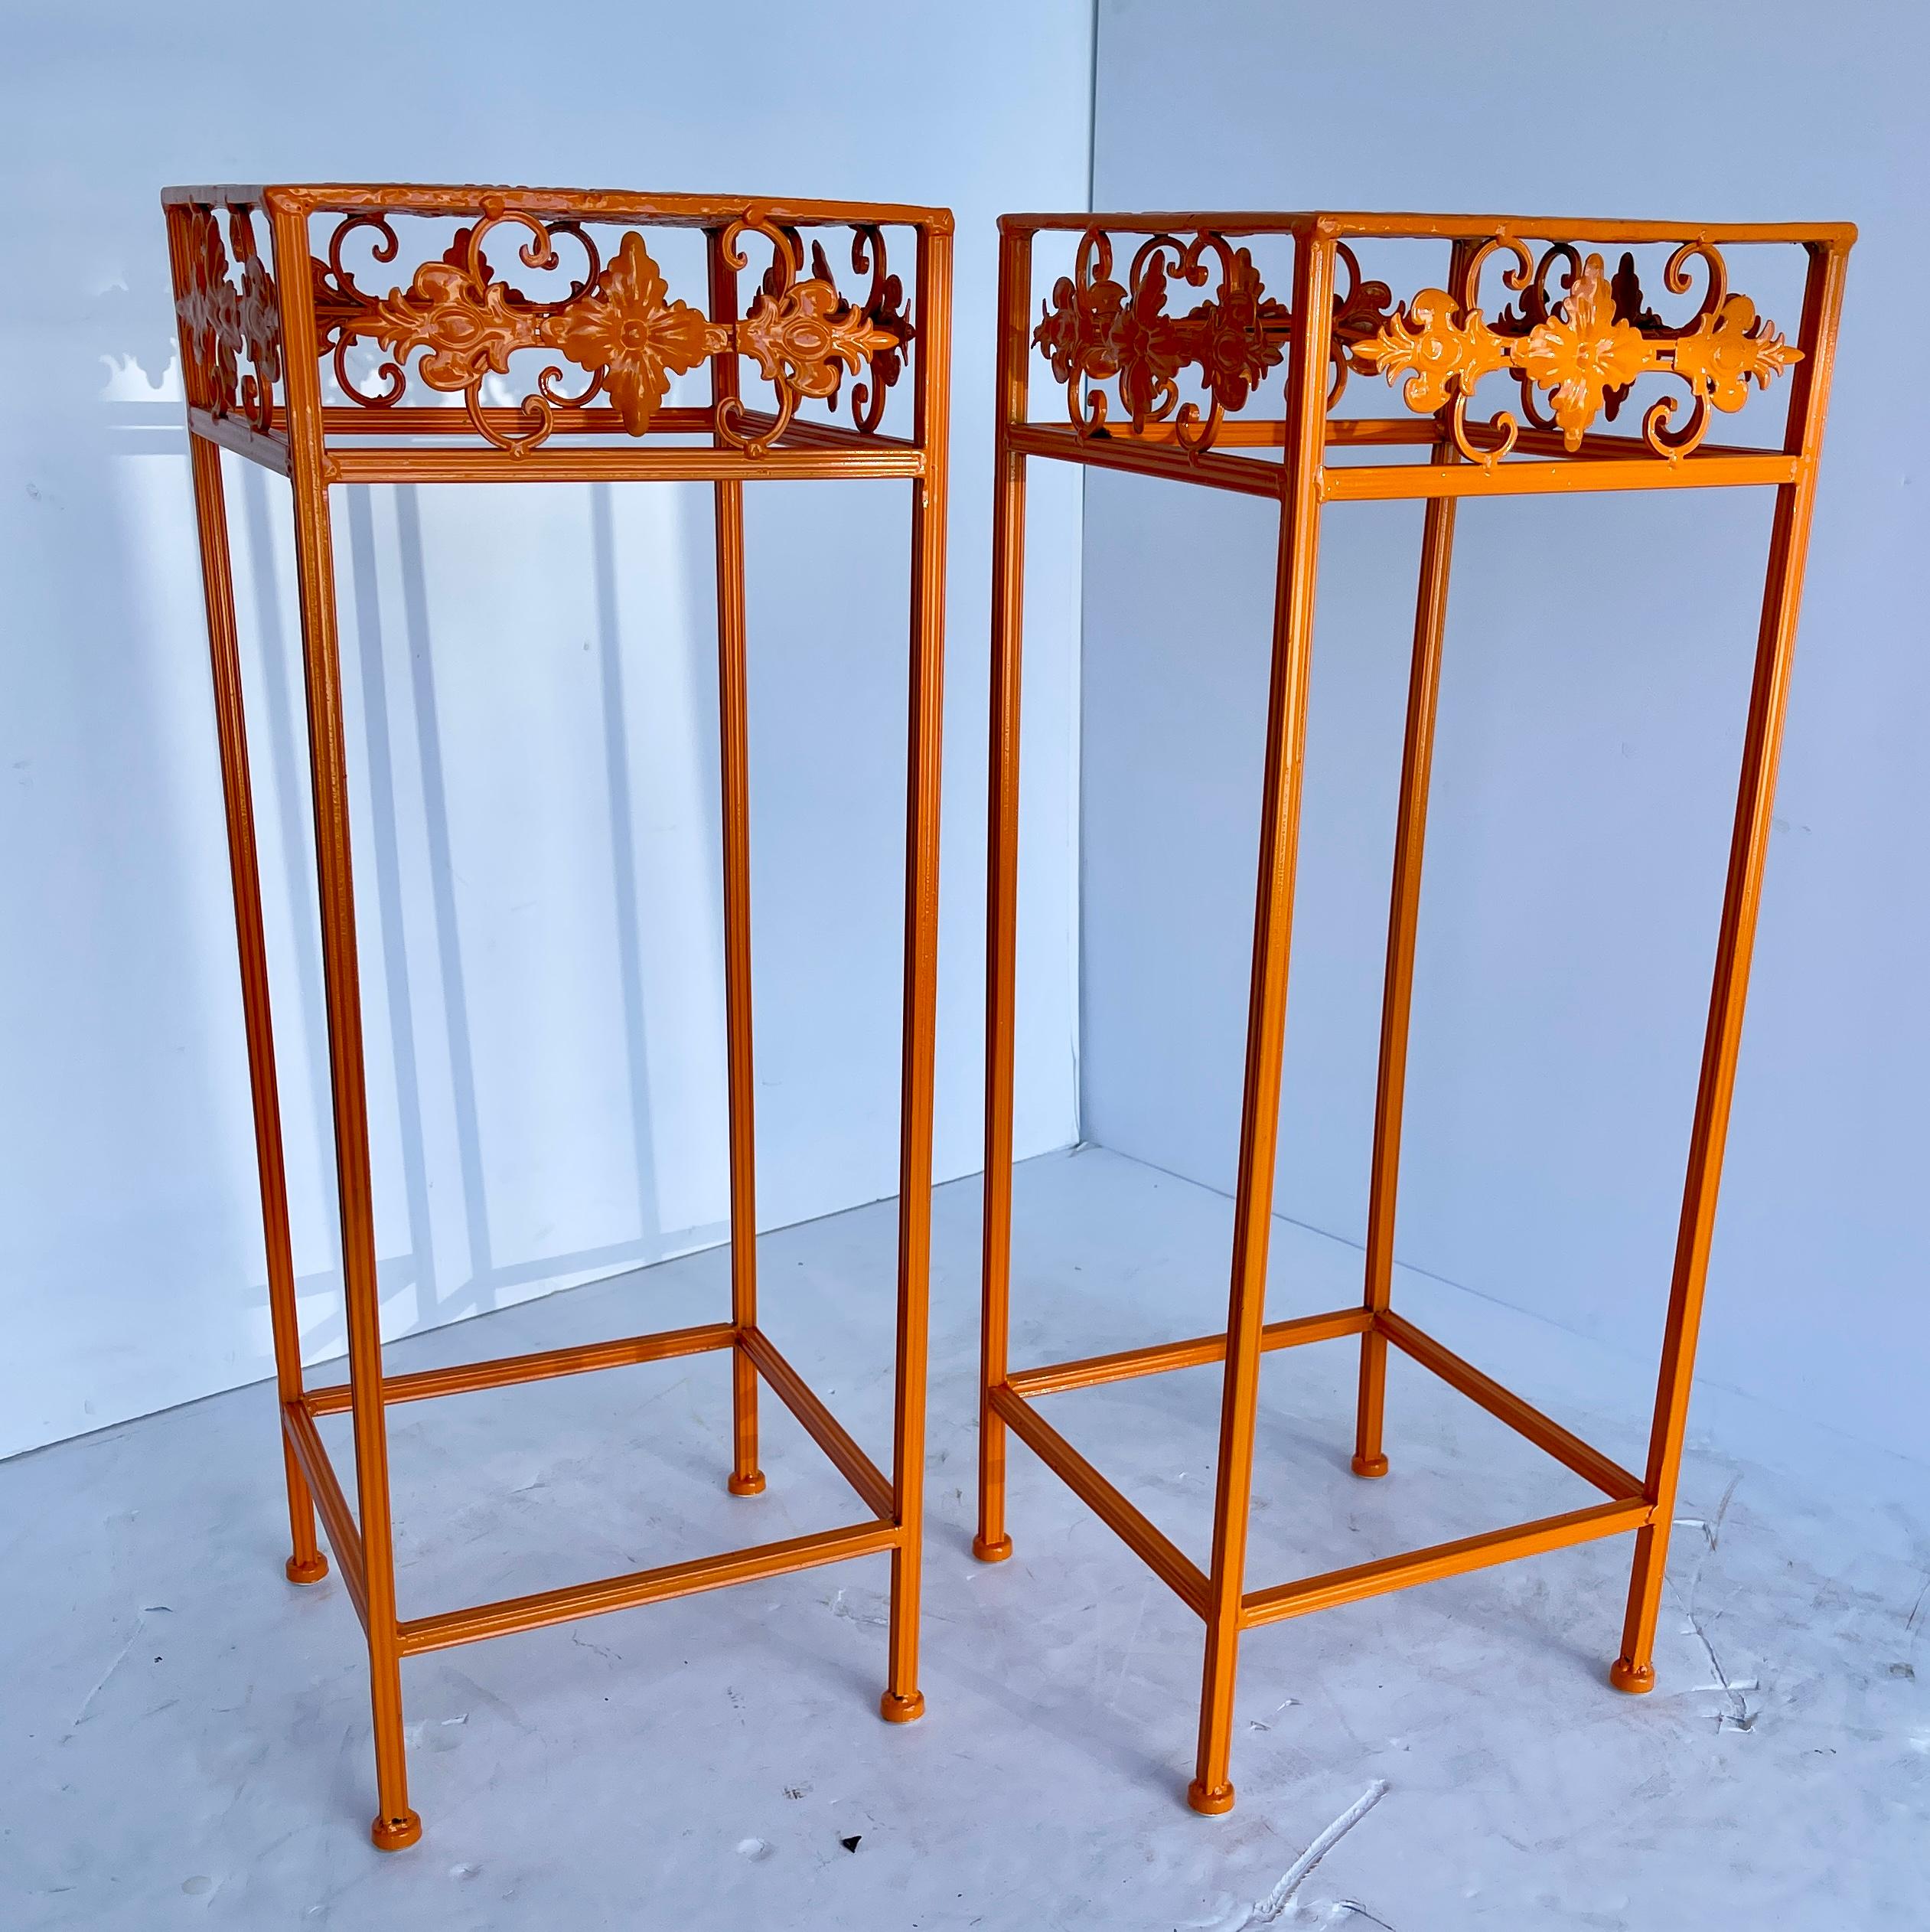 Mid-Century Modern plant stands. Feast your eyes on these exciting bold orange powder coated scrolled plant stands. Freshly powder-coated in Mid-Century Modern cheerful orange, the tall plant stands are perfect for indoor use or as a fun statement